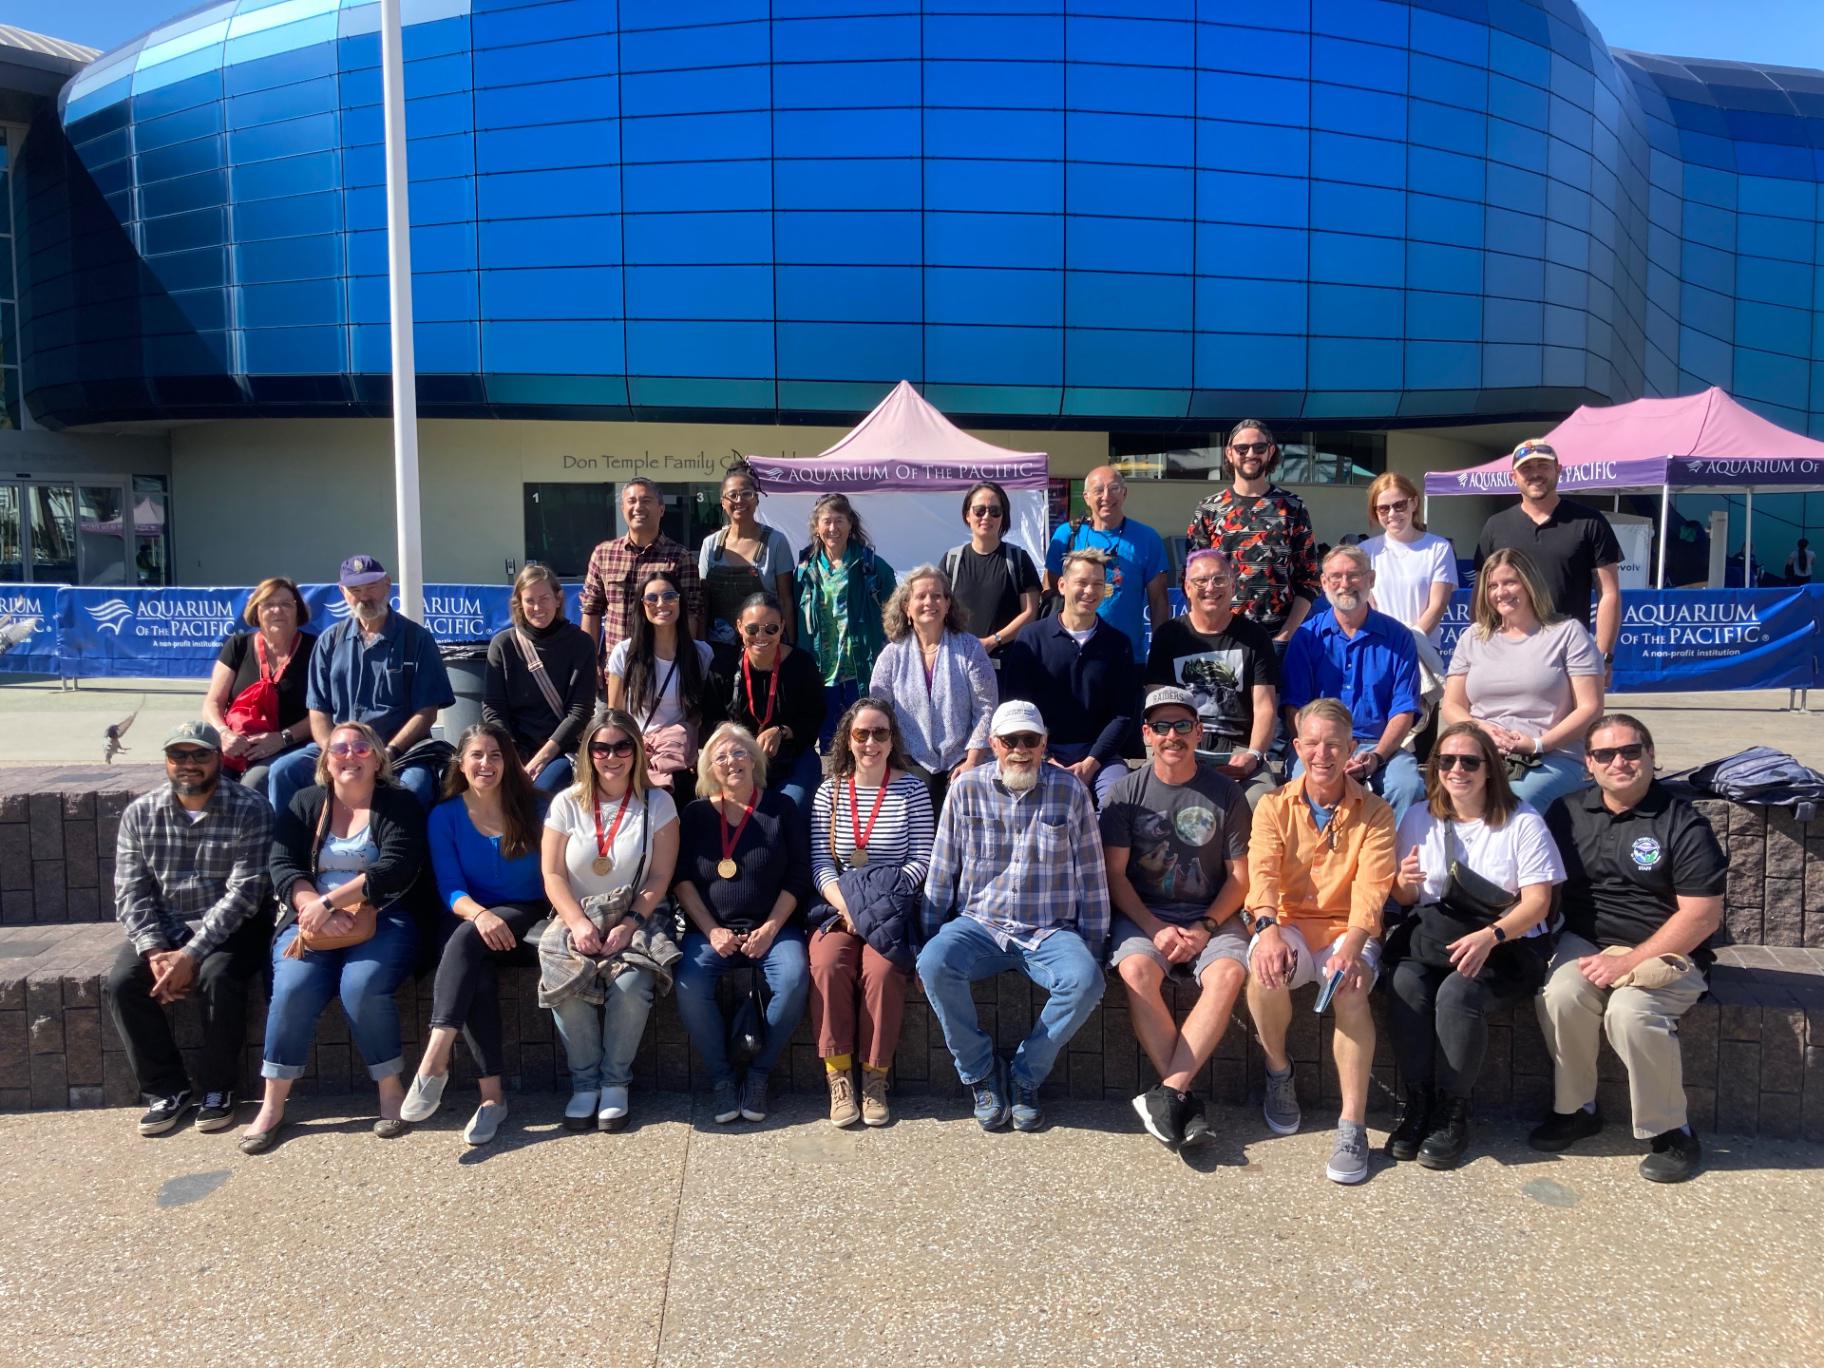 Wrigley Institute staff pose for a group photo in front of the Aquarium of the Pacific